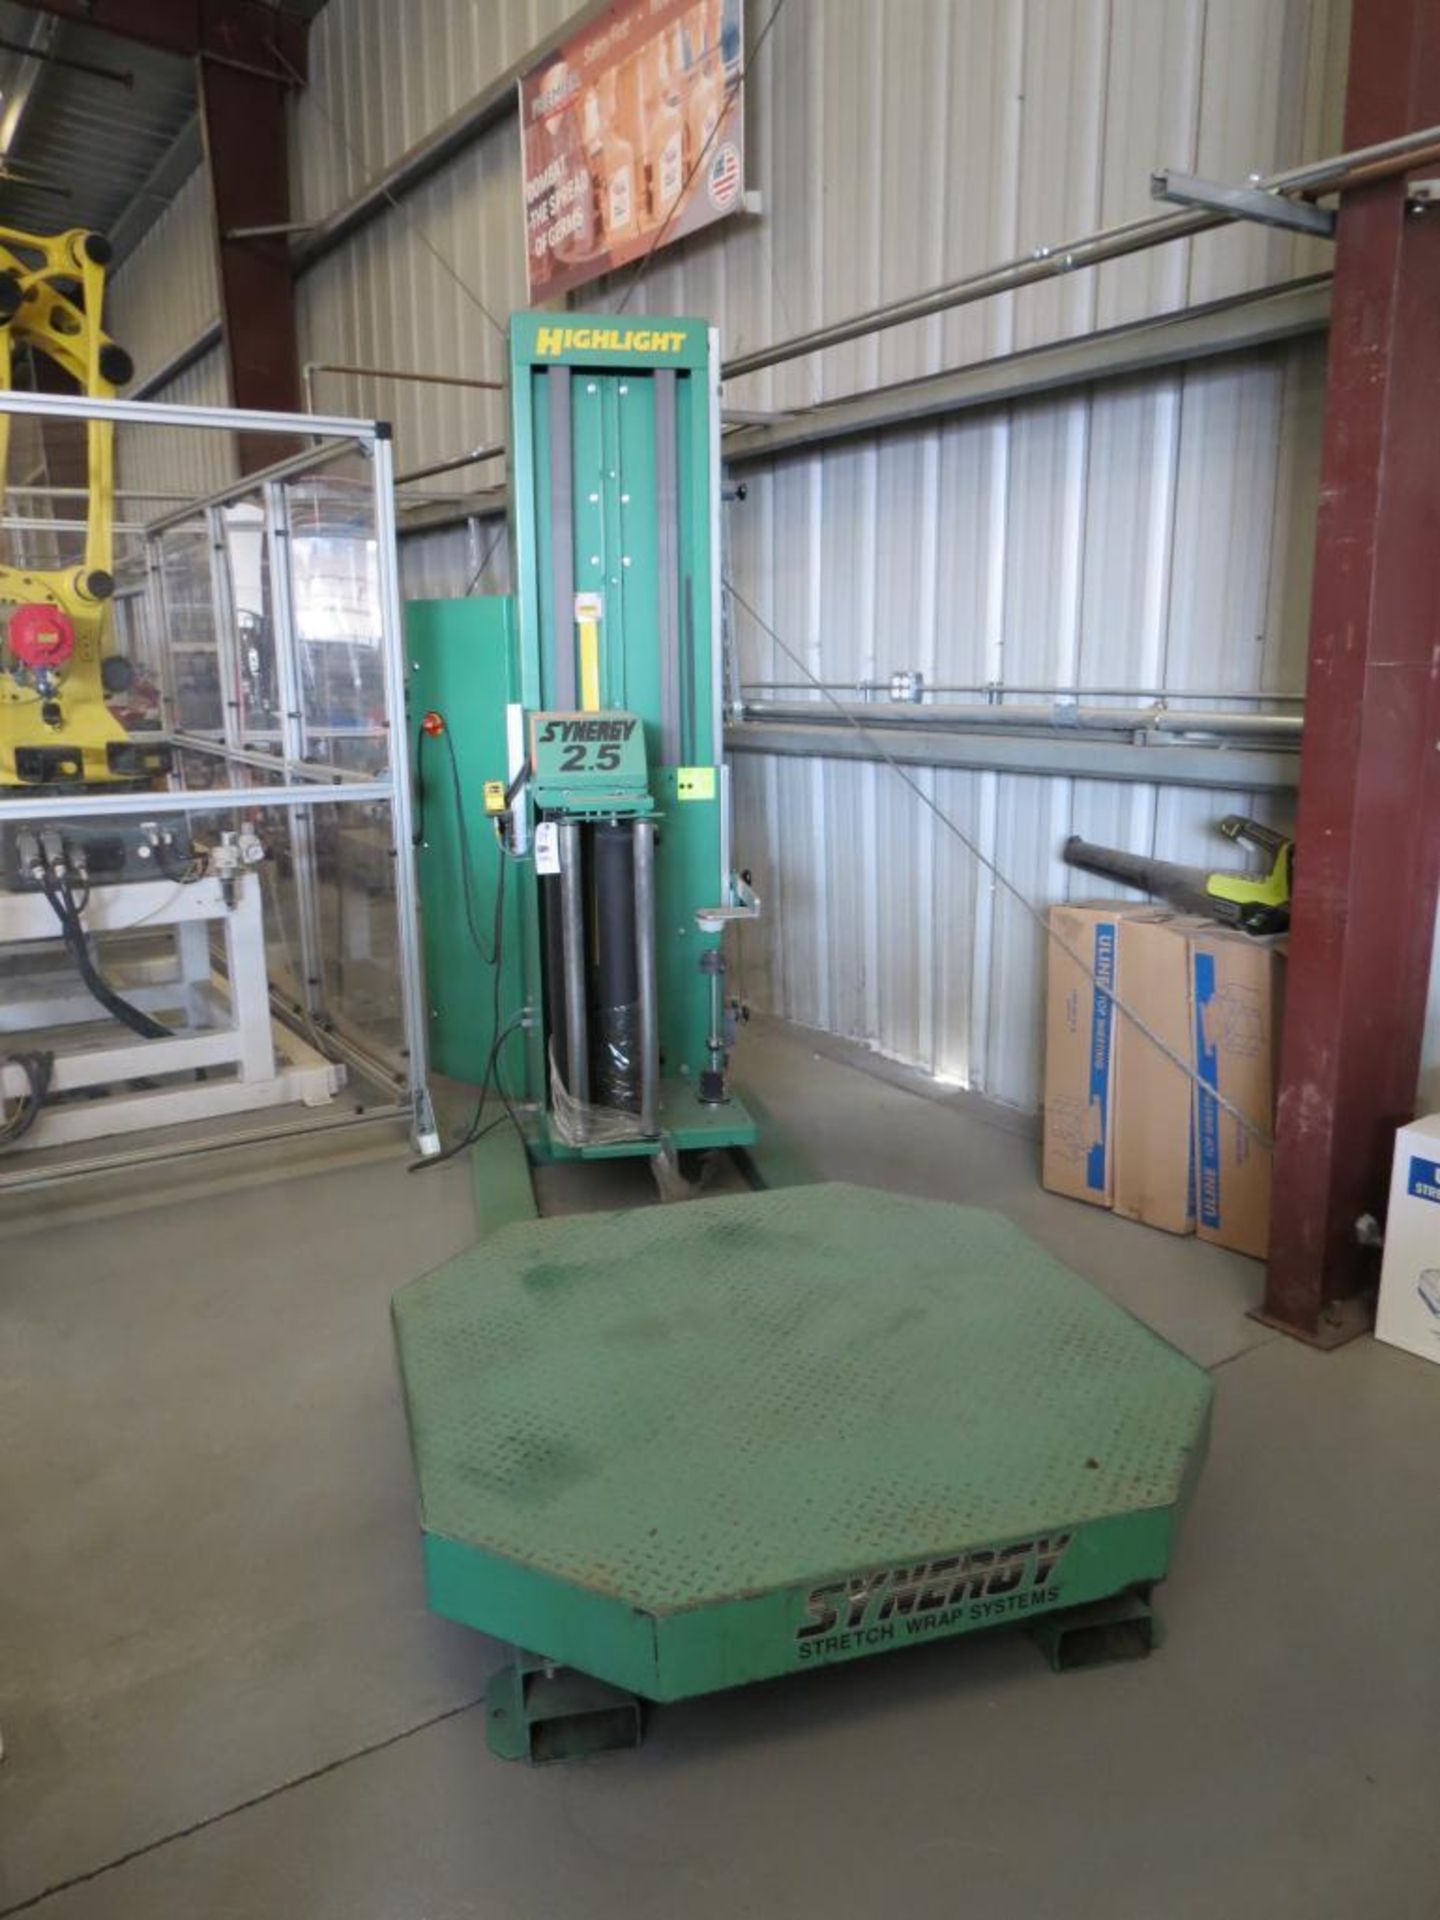 Highlight Synergy 2.5 Pallet Stretch Wrapping Machine, SN: D417-250-27526, X) Part of Complete